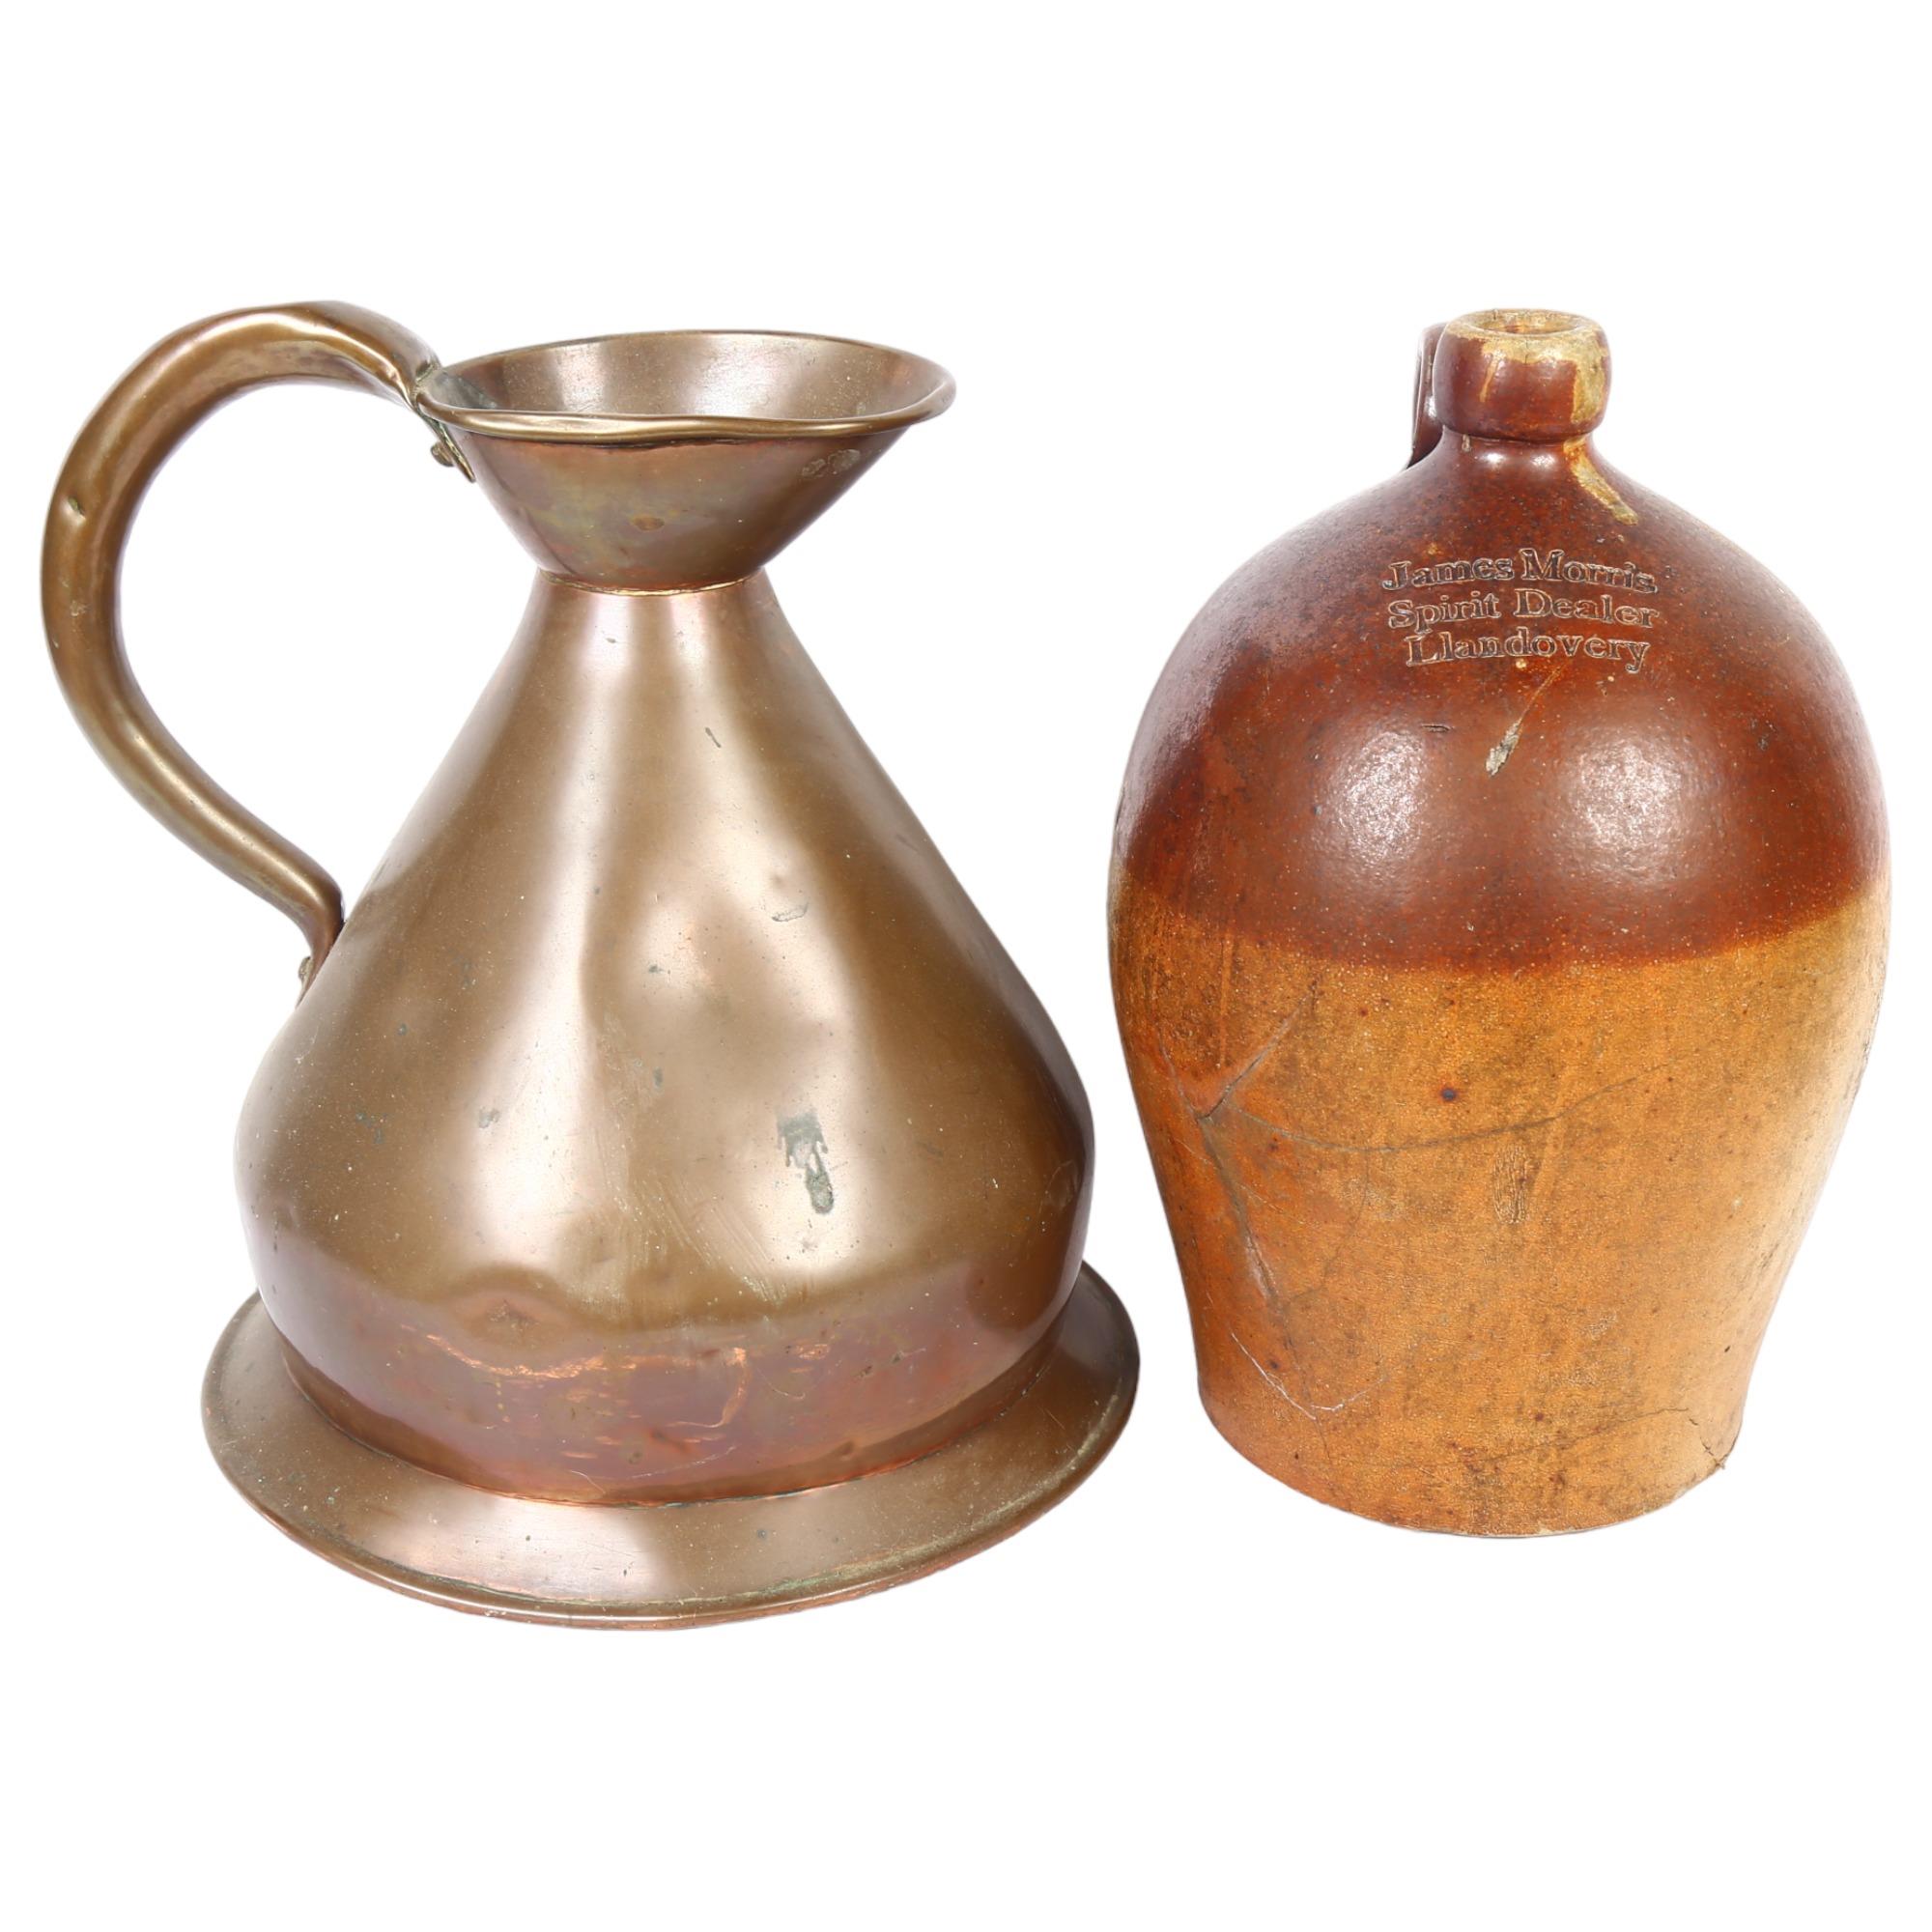 19th century stoneware flagon named to James Morris Spirit Dealer Llandovery, H30cm, and a Victorian